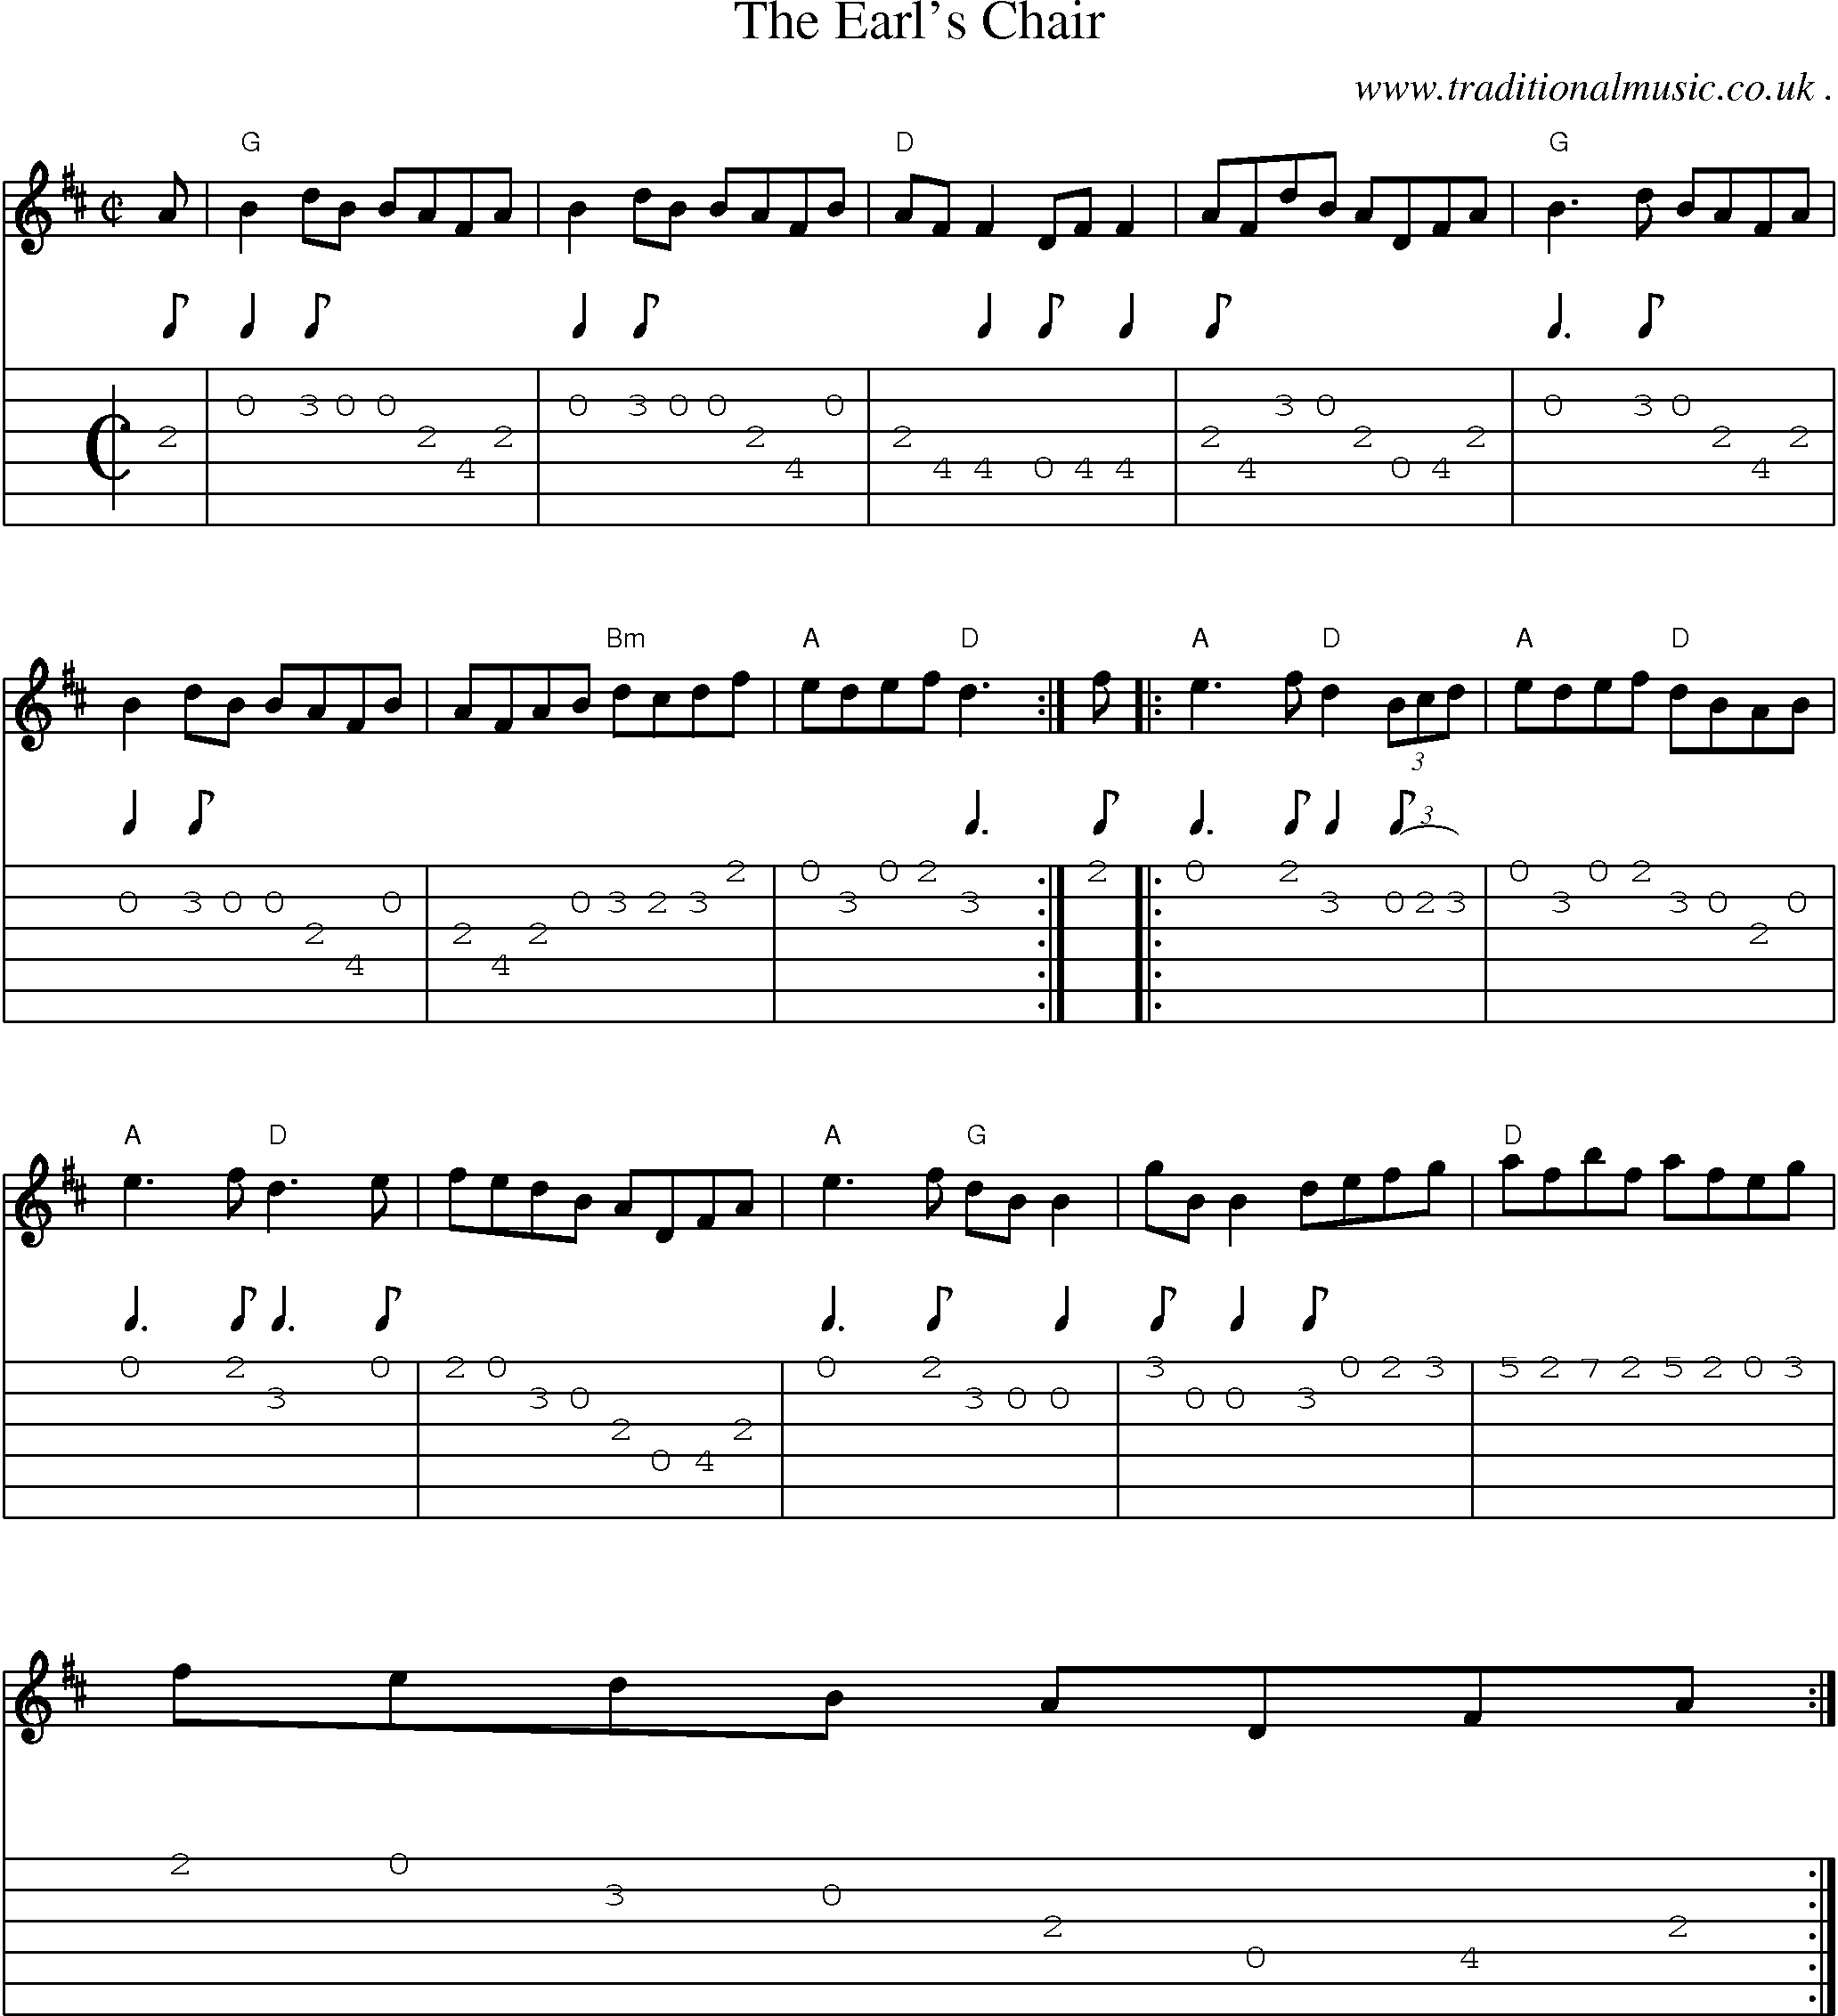 Music Score and Guitar Tabs for The Earls Chair